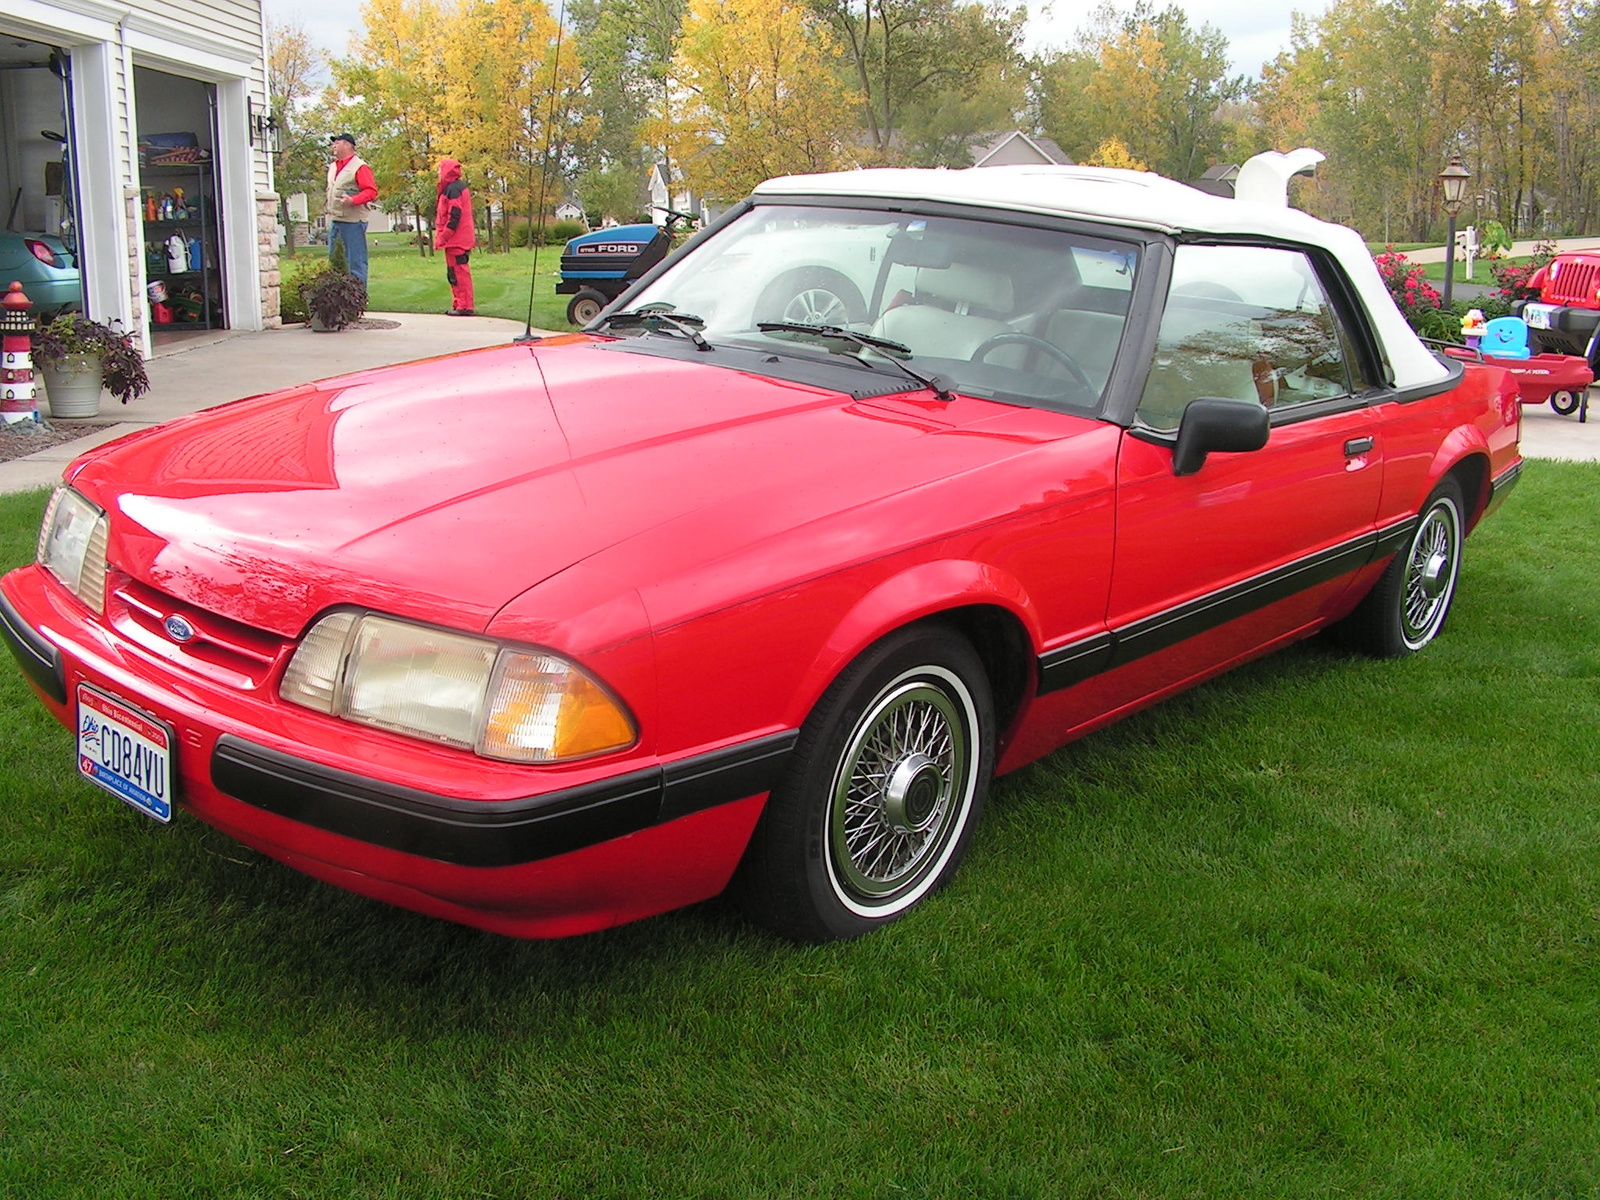 1990 Ford mustang lx convertible weight #7